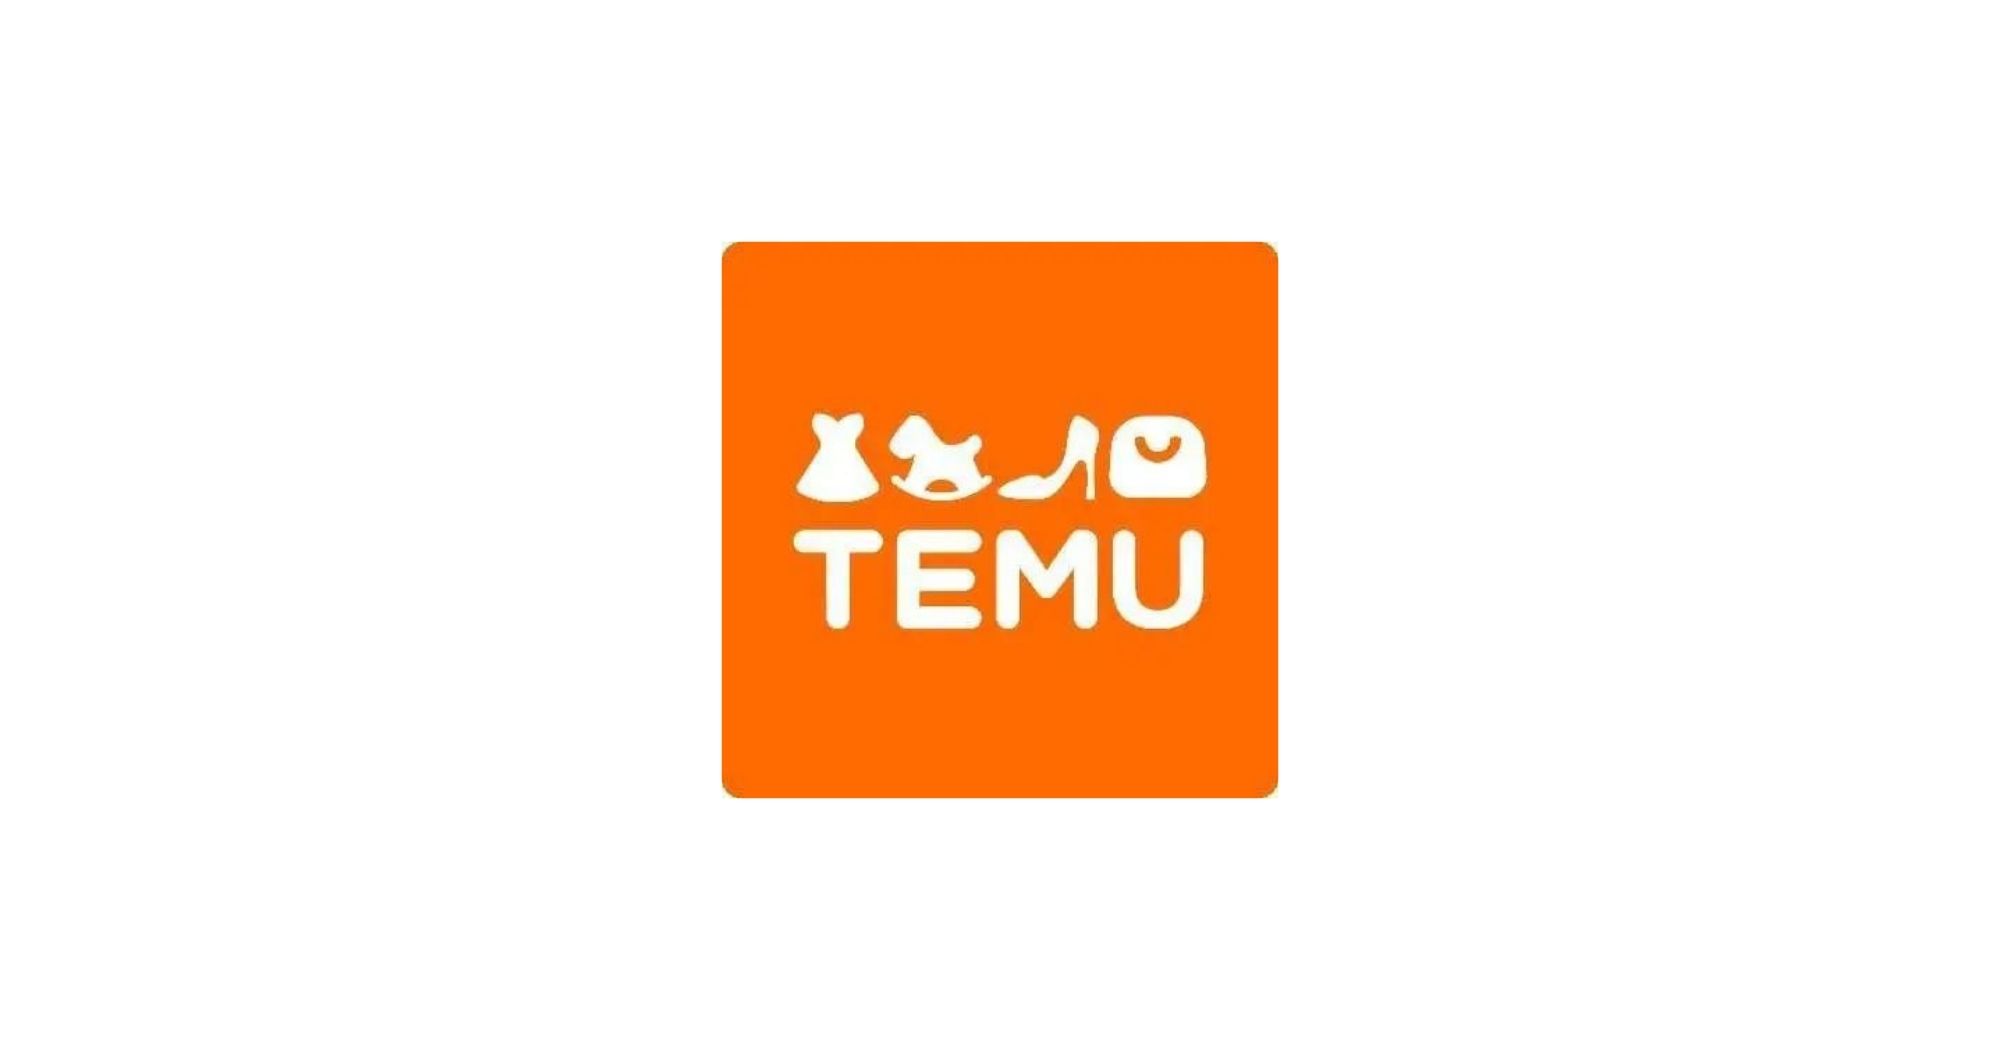 E-Commerce Marketplace Temu’s Entry Widens Consumer Choices